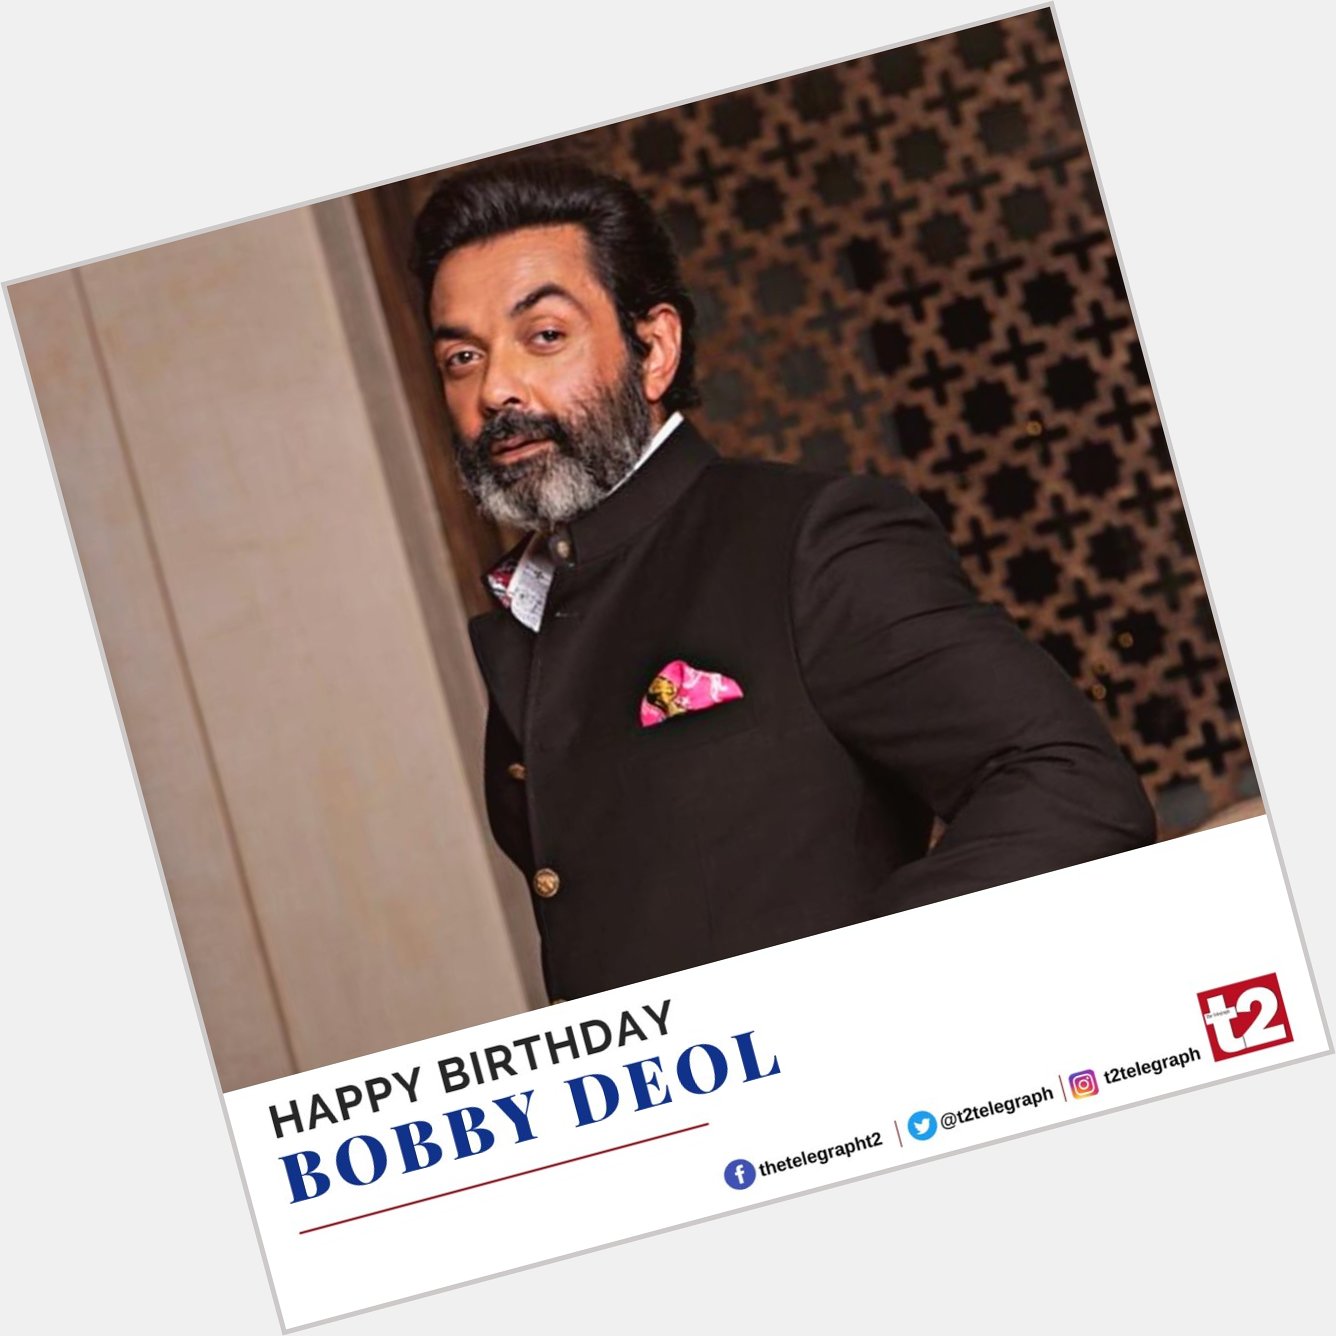 He\s witnessing a well-deserved career resurgence. Happy birthday Bobby Deol 